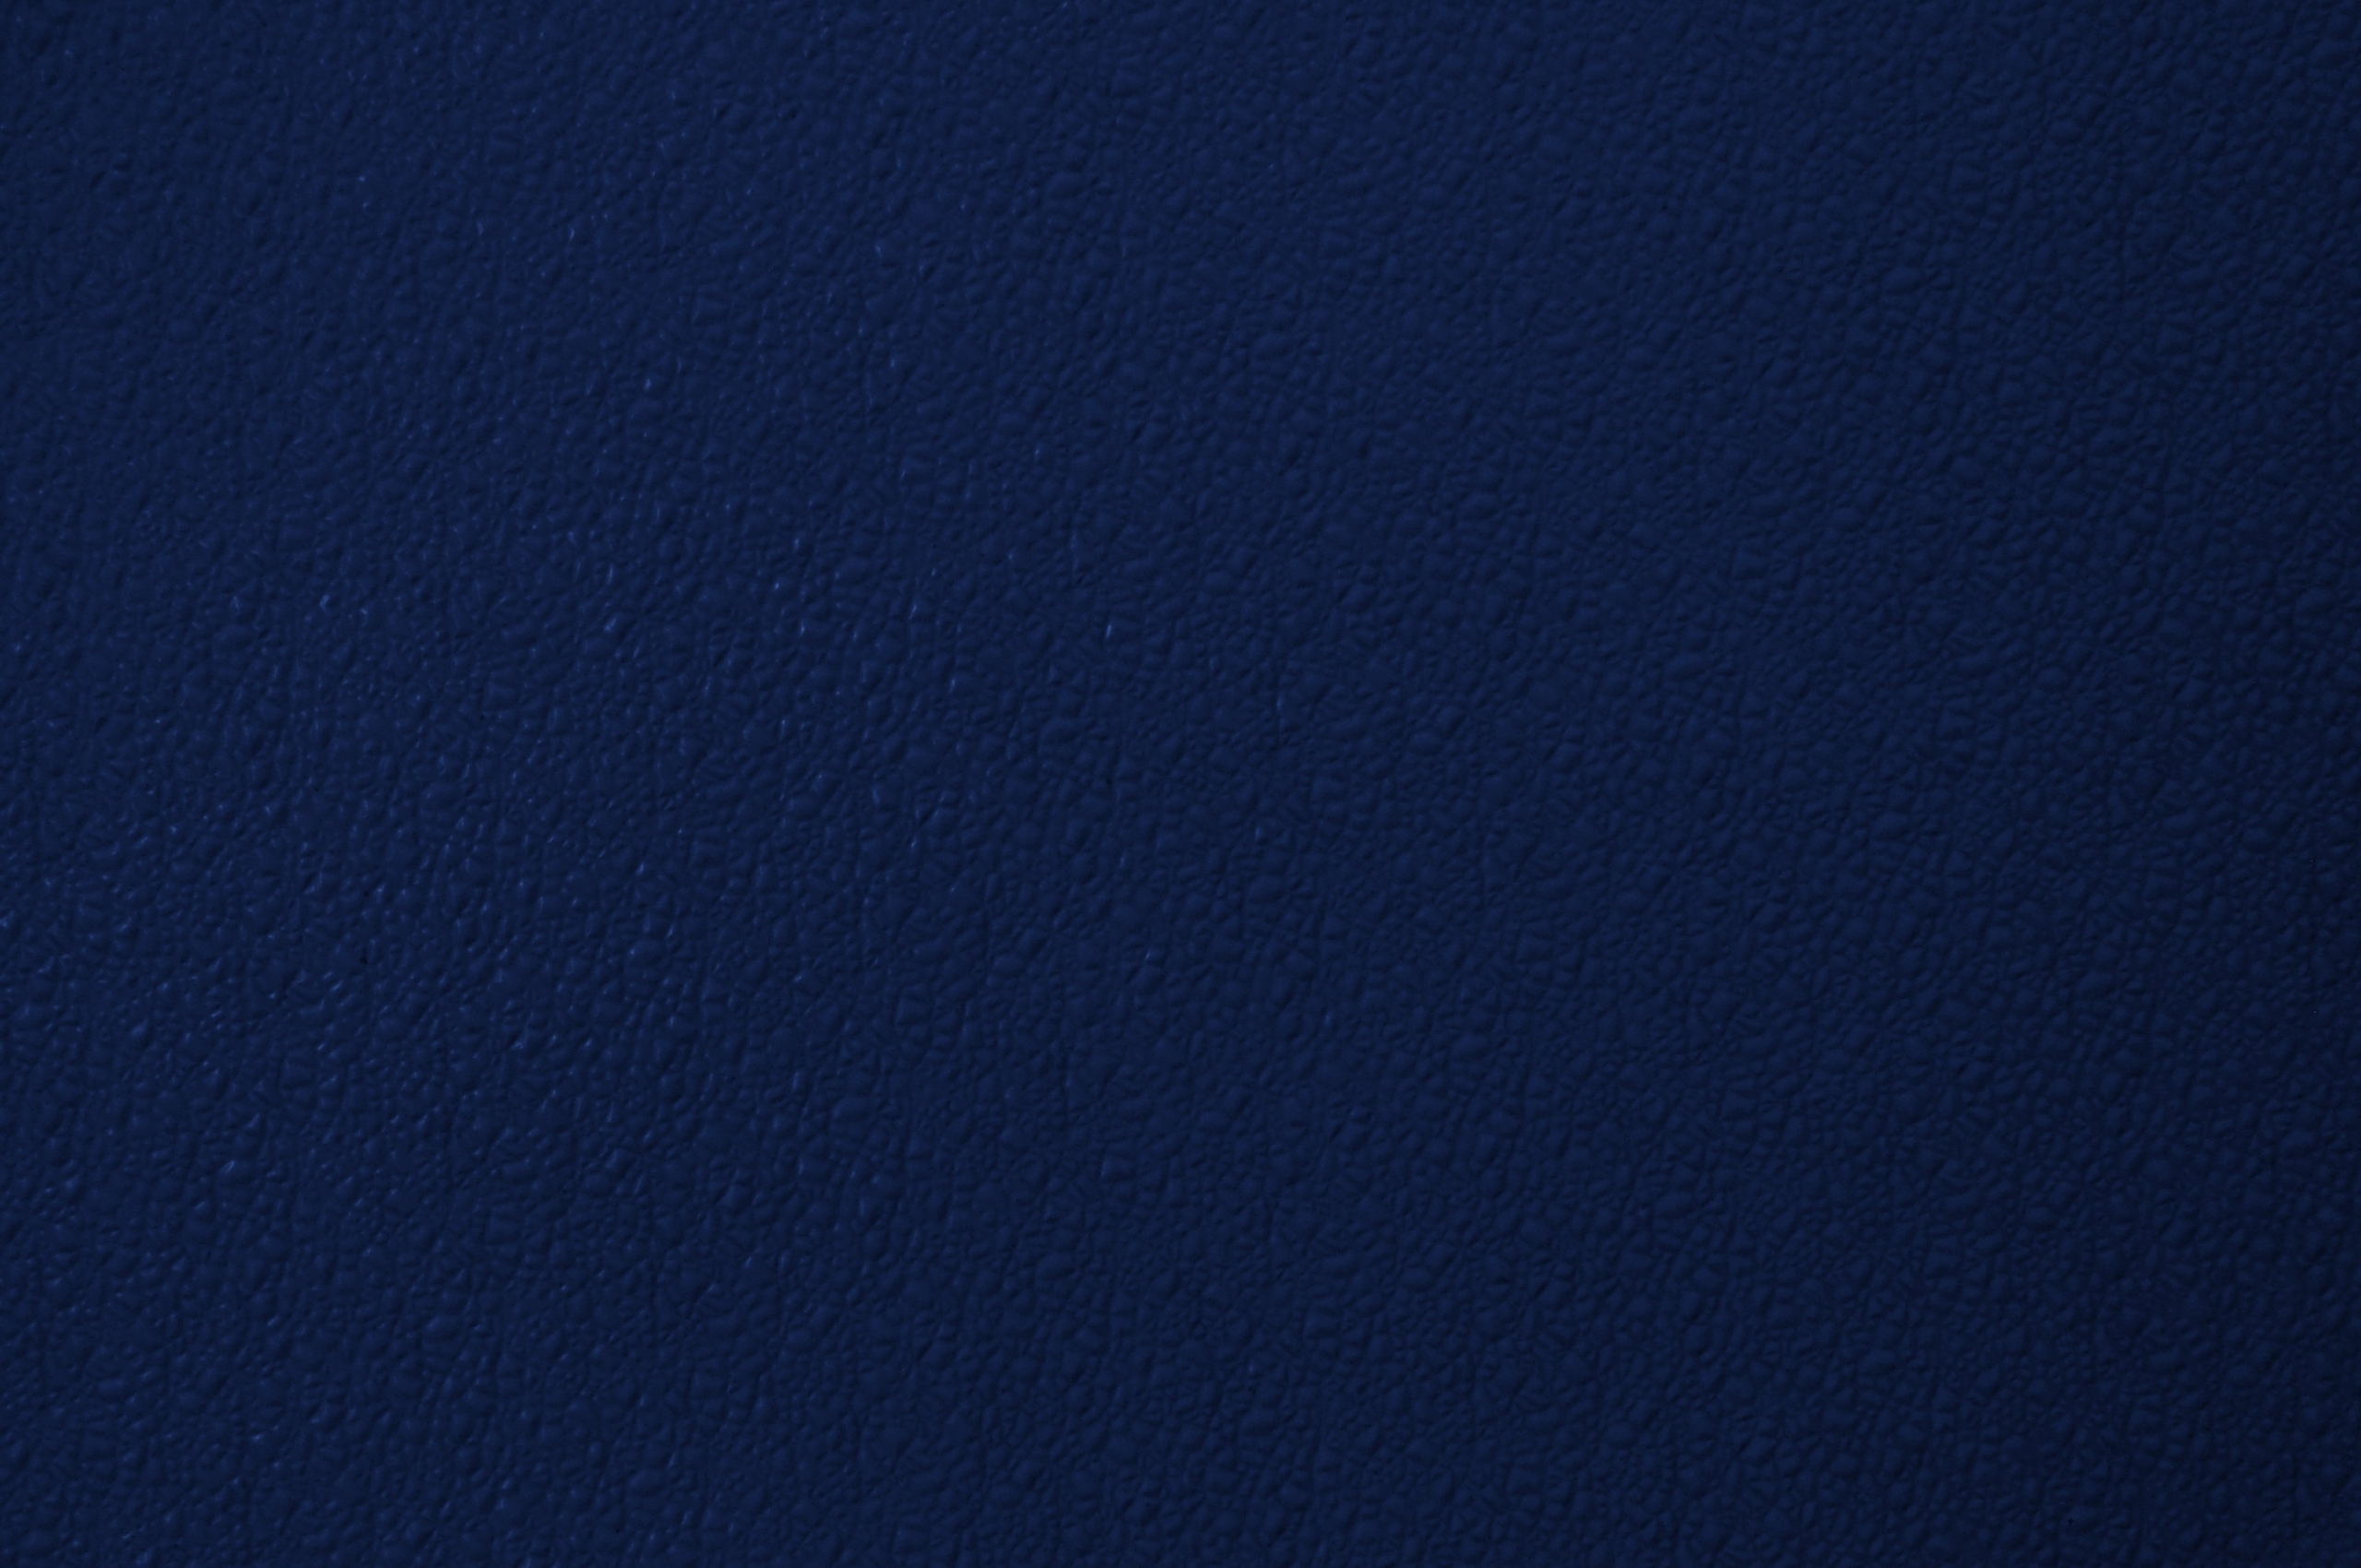 Bumpy Navy Blue Plastic Texture Picture Photograph - Navy Blue Wall Texture , HD Wallpaper & Backgrounds